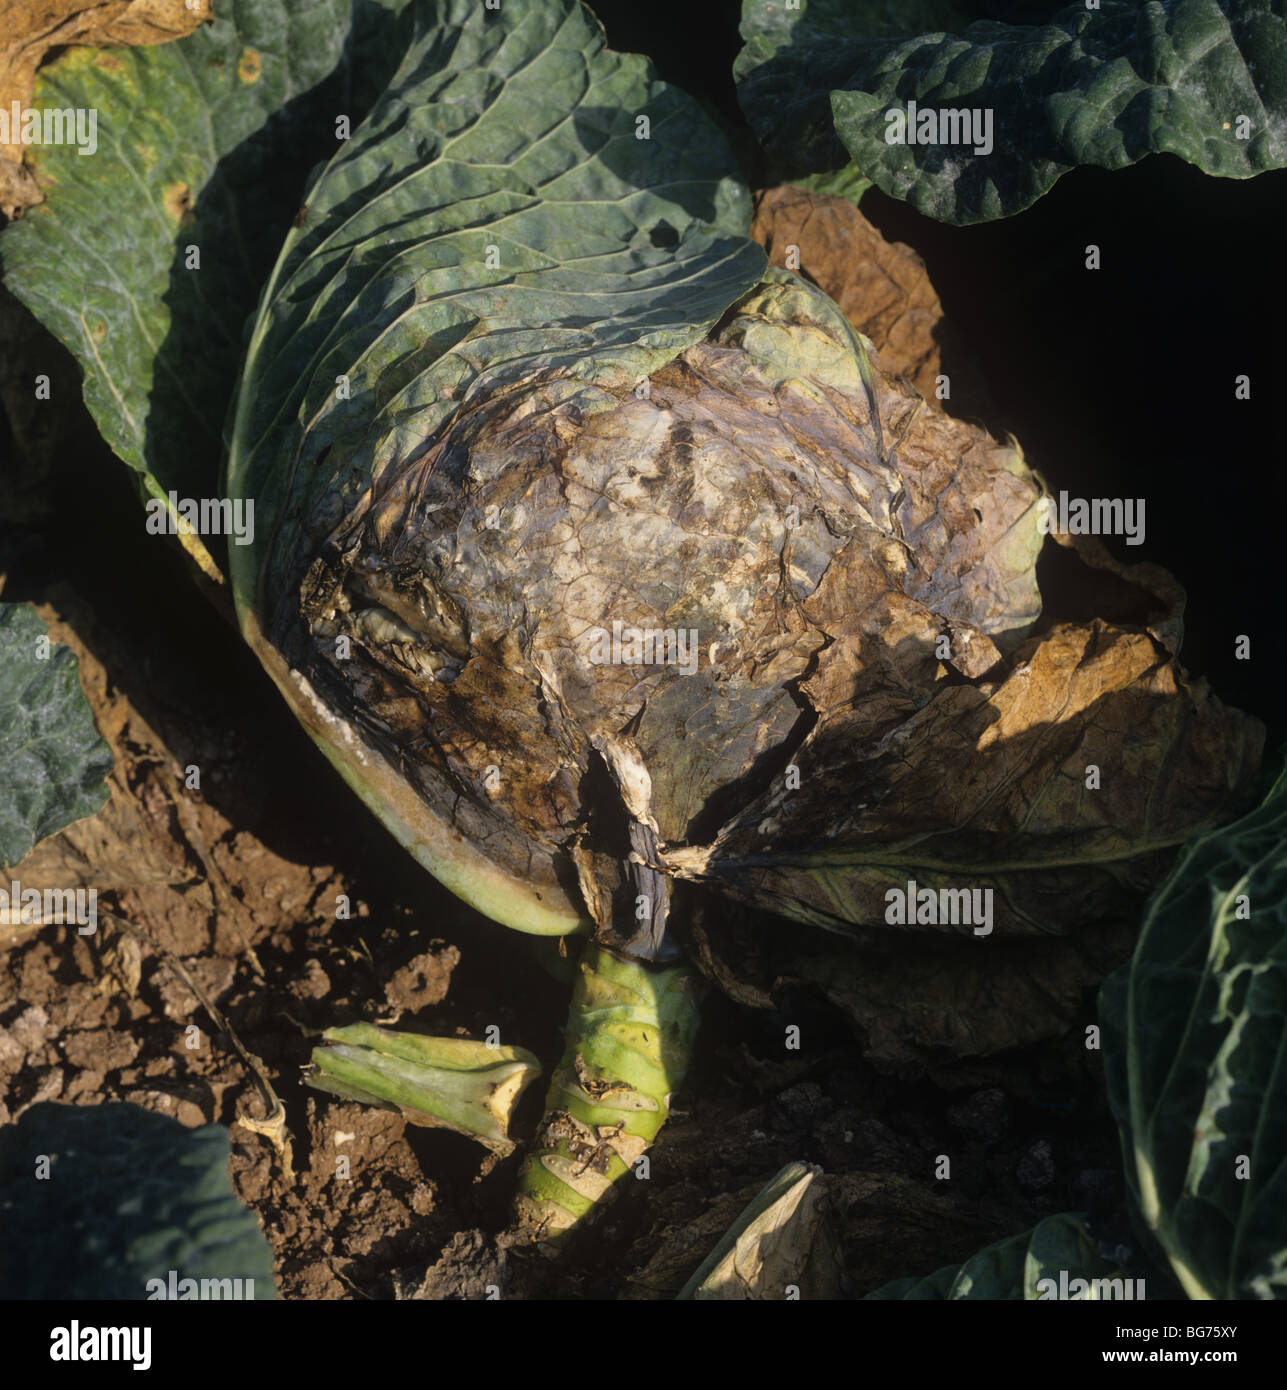 Sclerotinia stem rot (Sclerotinia sclerotiorum) infection on old cabbage plant, Portugal Stock Photo